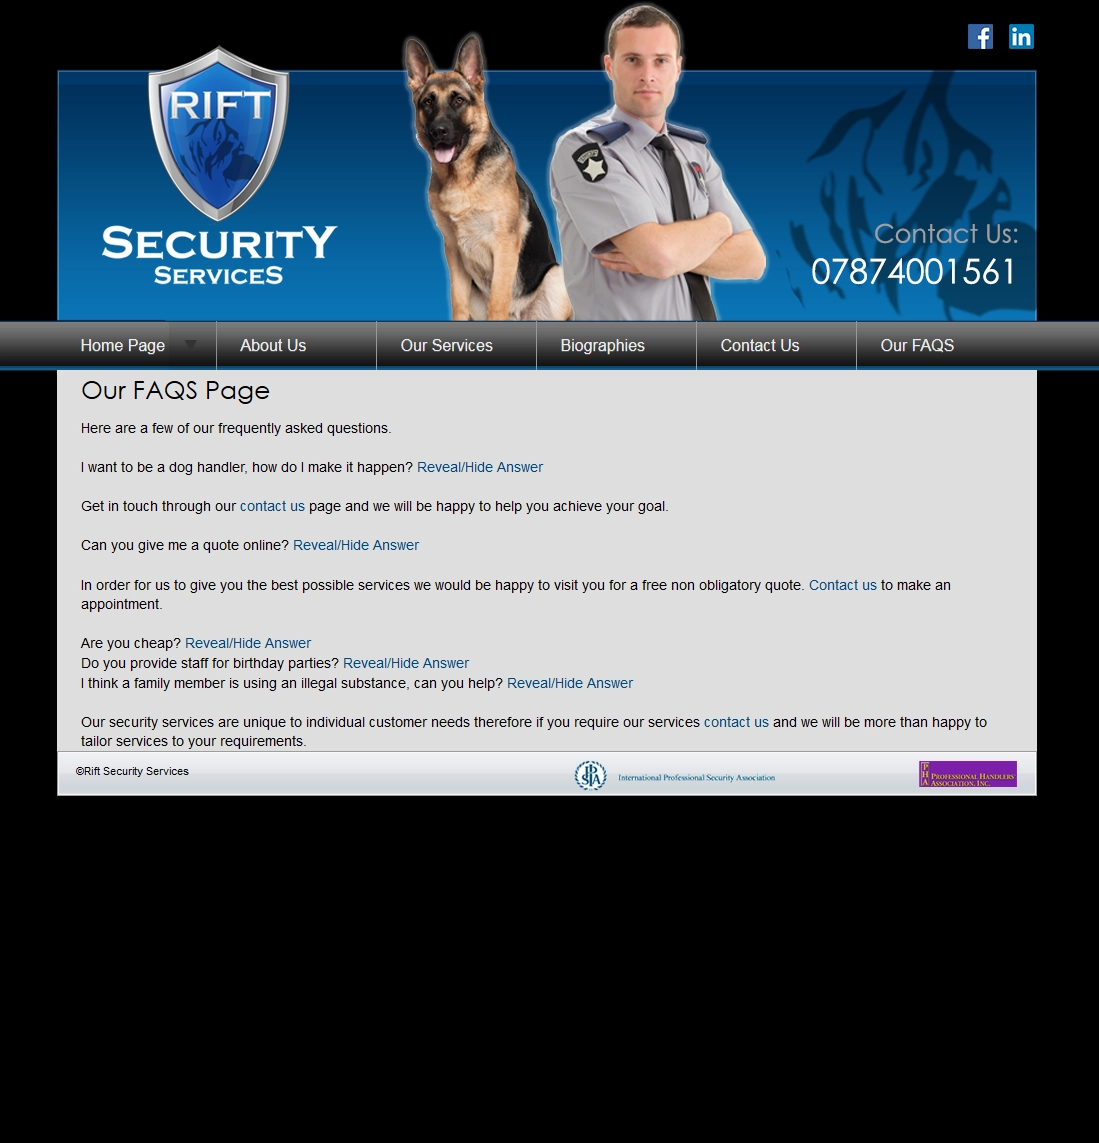 An image from the Rift Security Services website